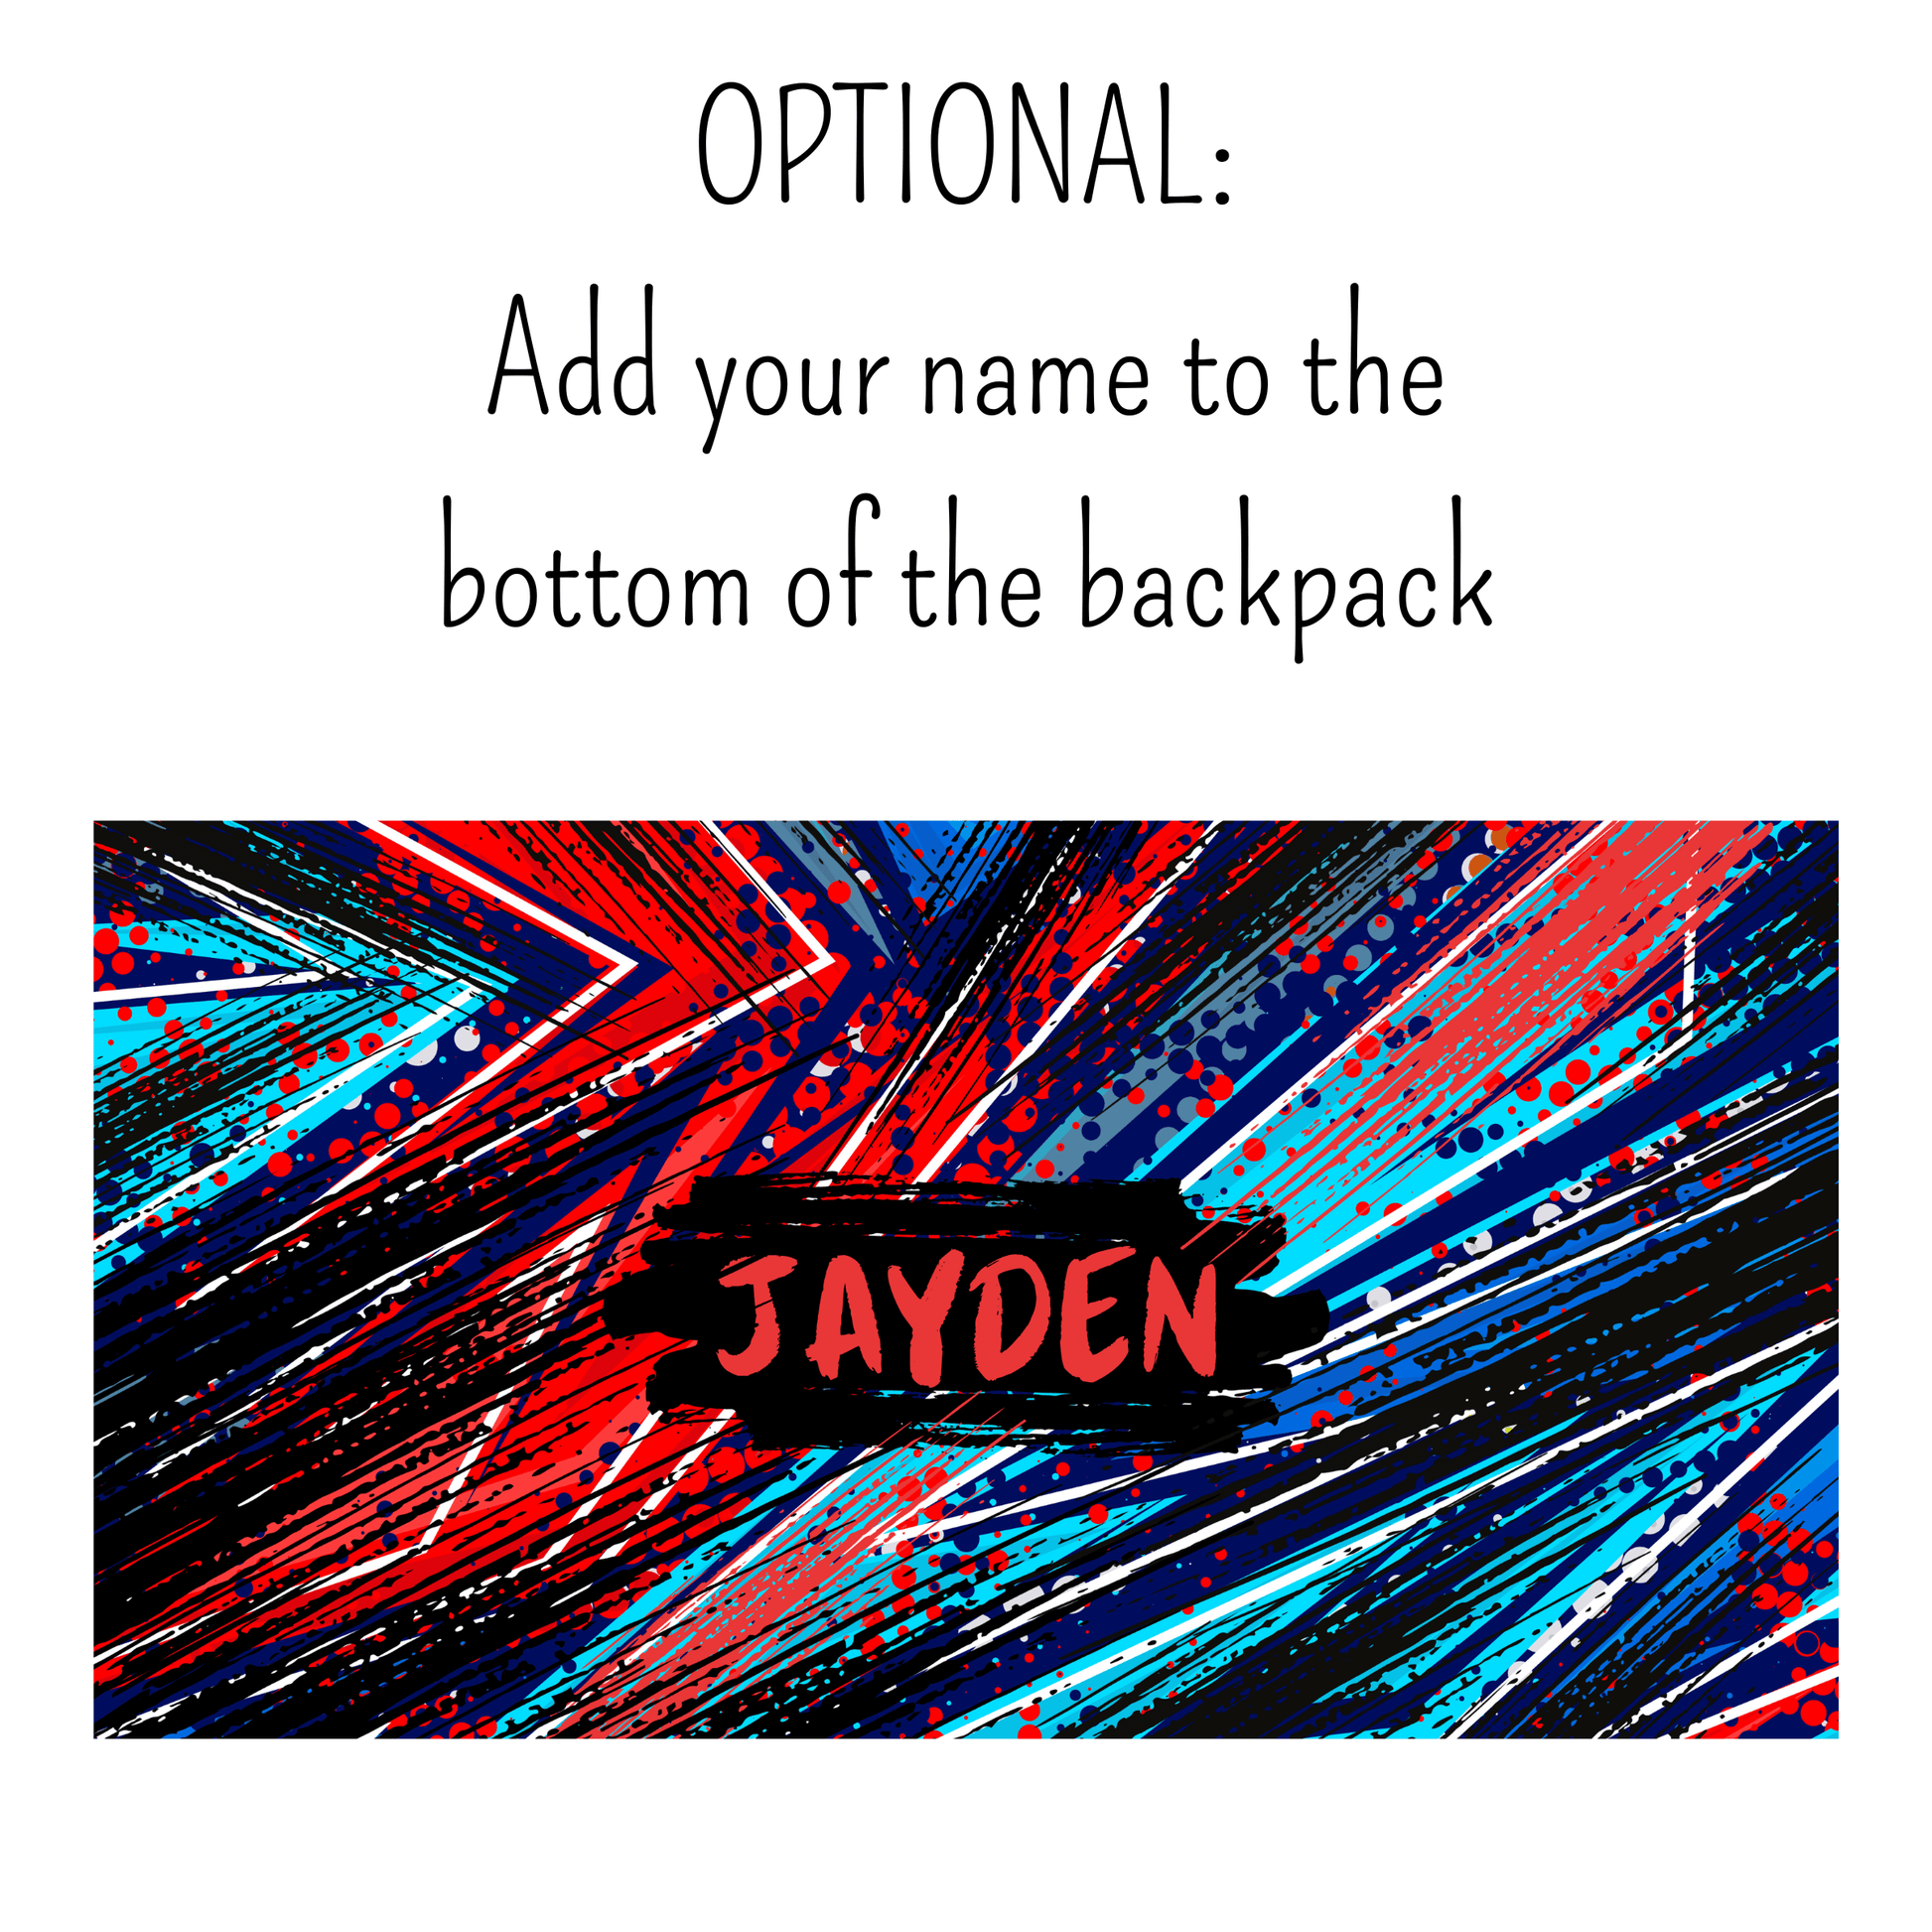 Optional to add your childs name to the bottom of the backpack in the font shown.